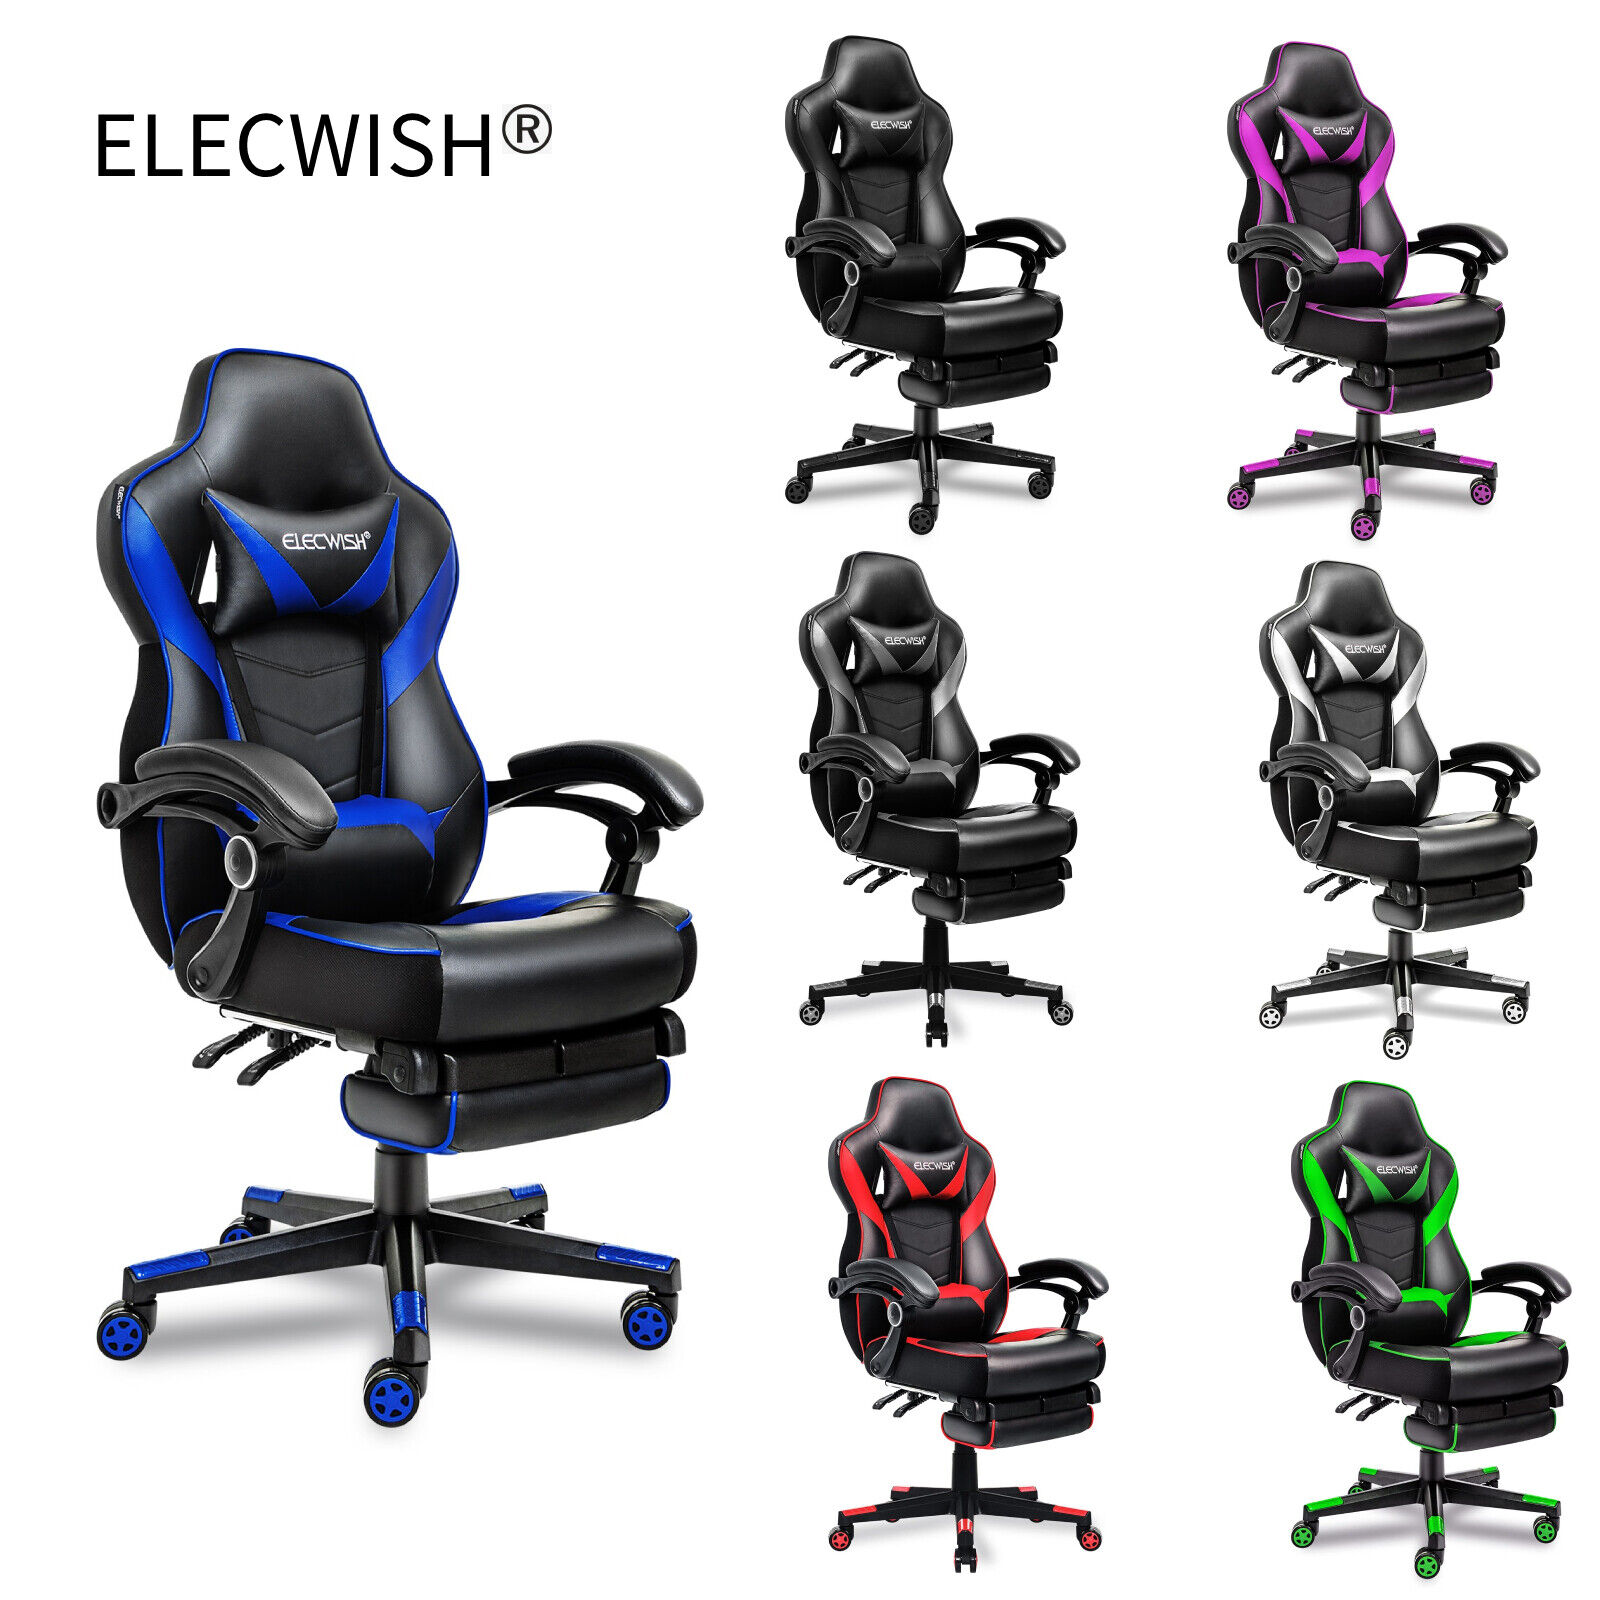 15 Superior Elecwish Gaming Chair for 2023